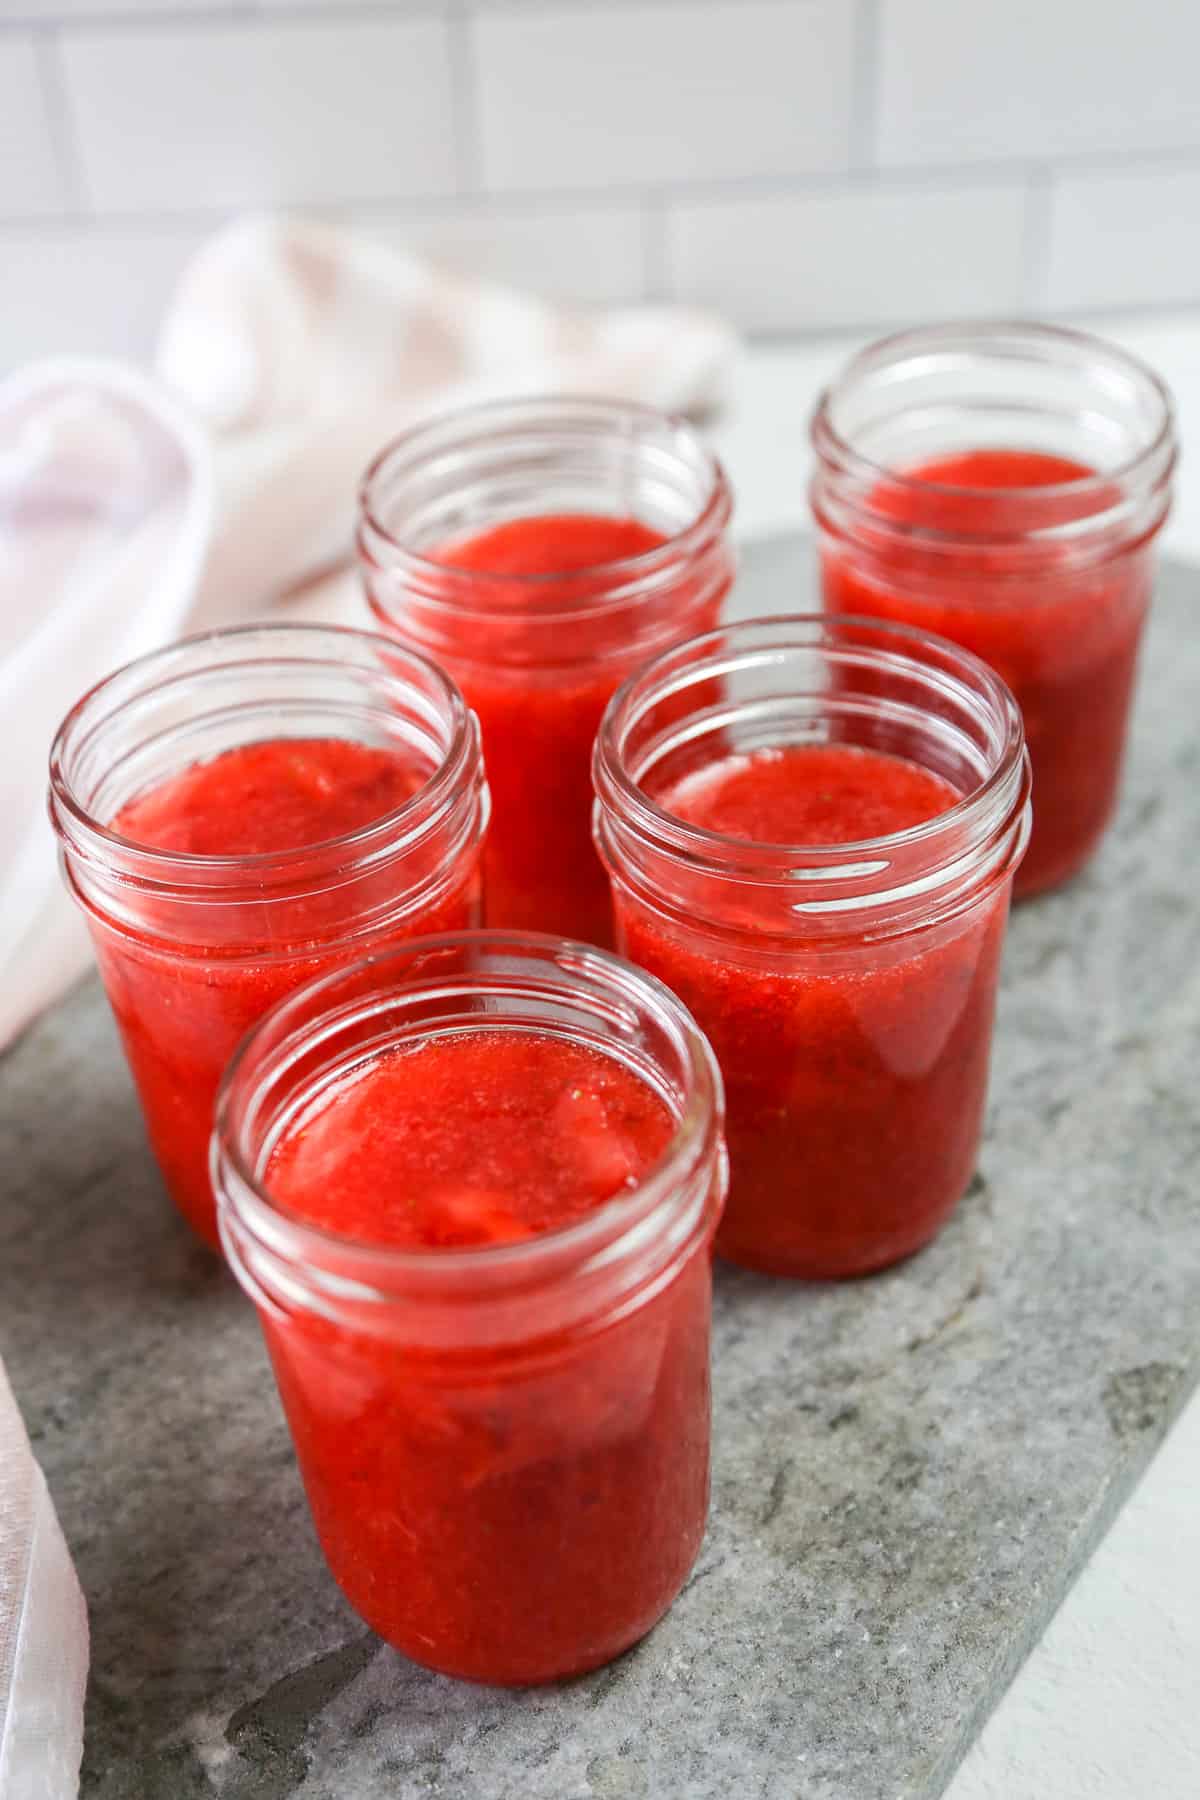 Jars of strawberry freezer jam without lids cooling on a counter.